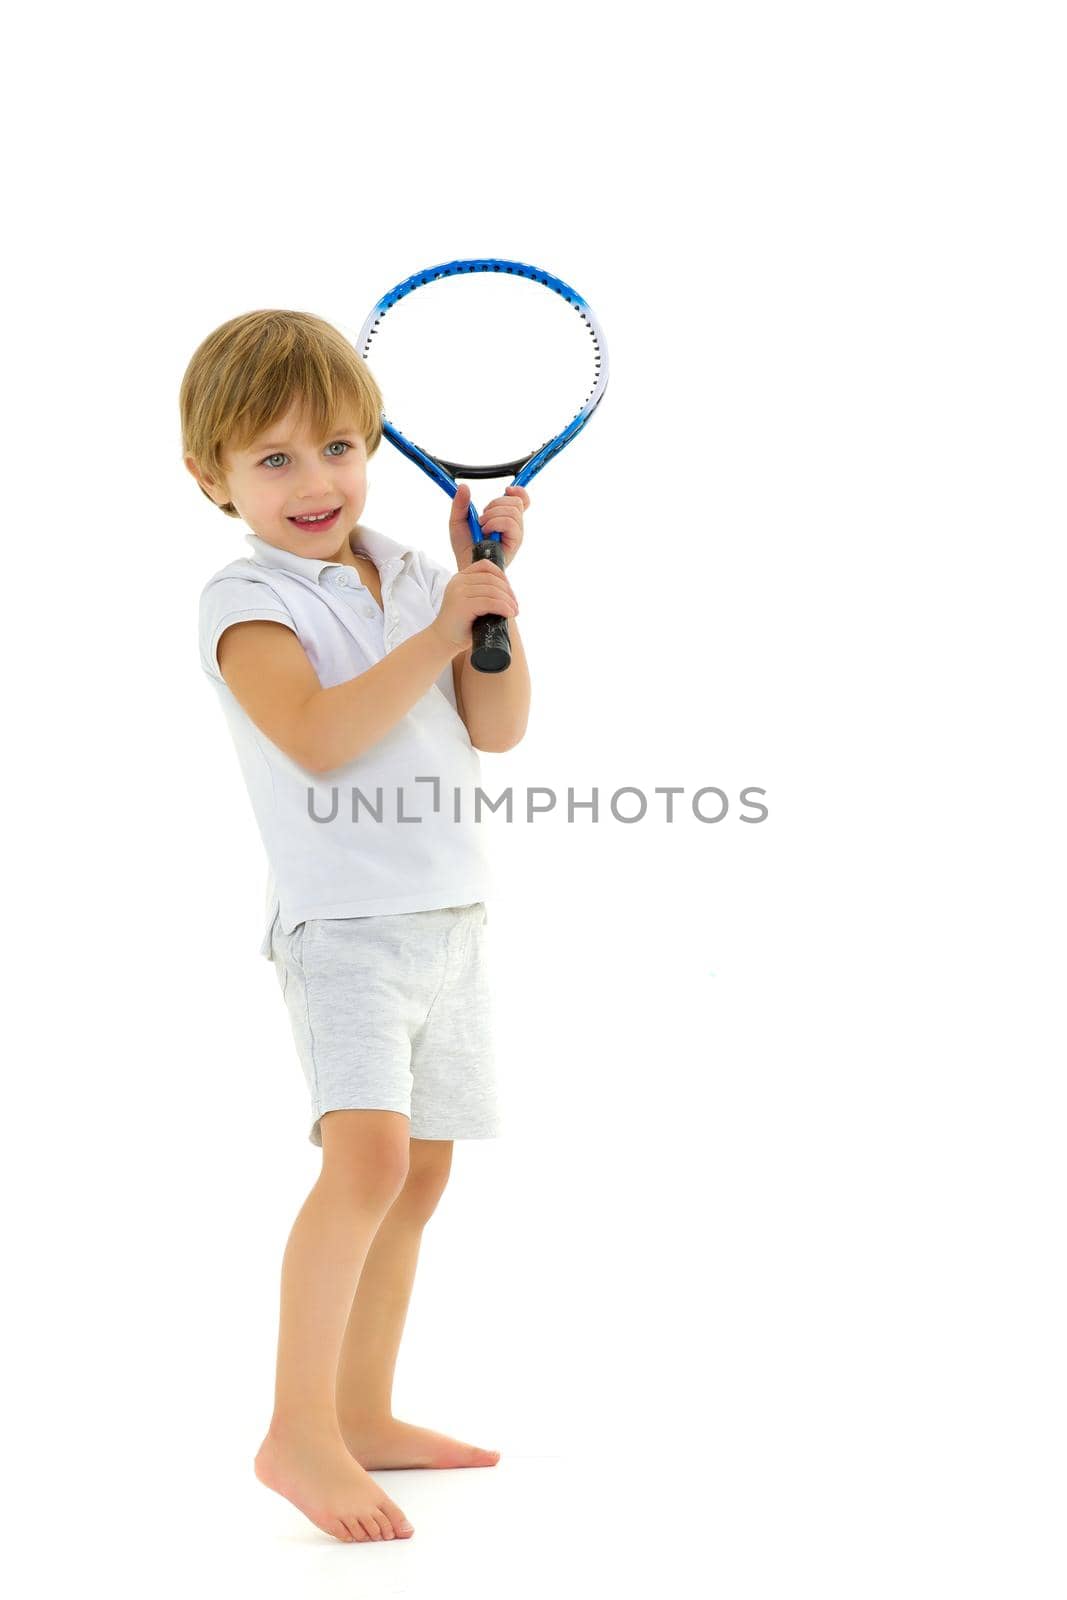 Cute little boy playing tennis. Adorable kid five years old in sports outfit holding tennis racket. Boy playing against white background. Active healthy lifestyle concept